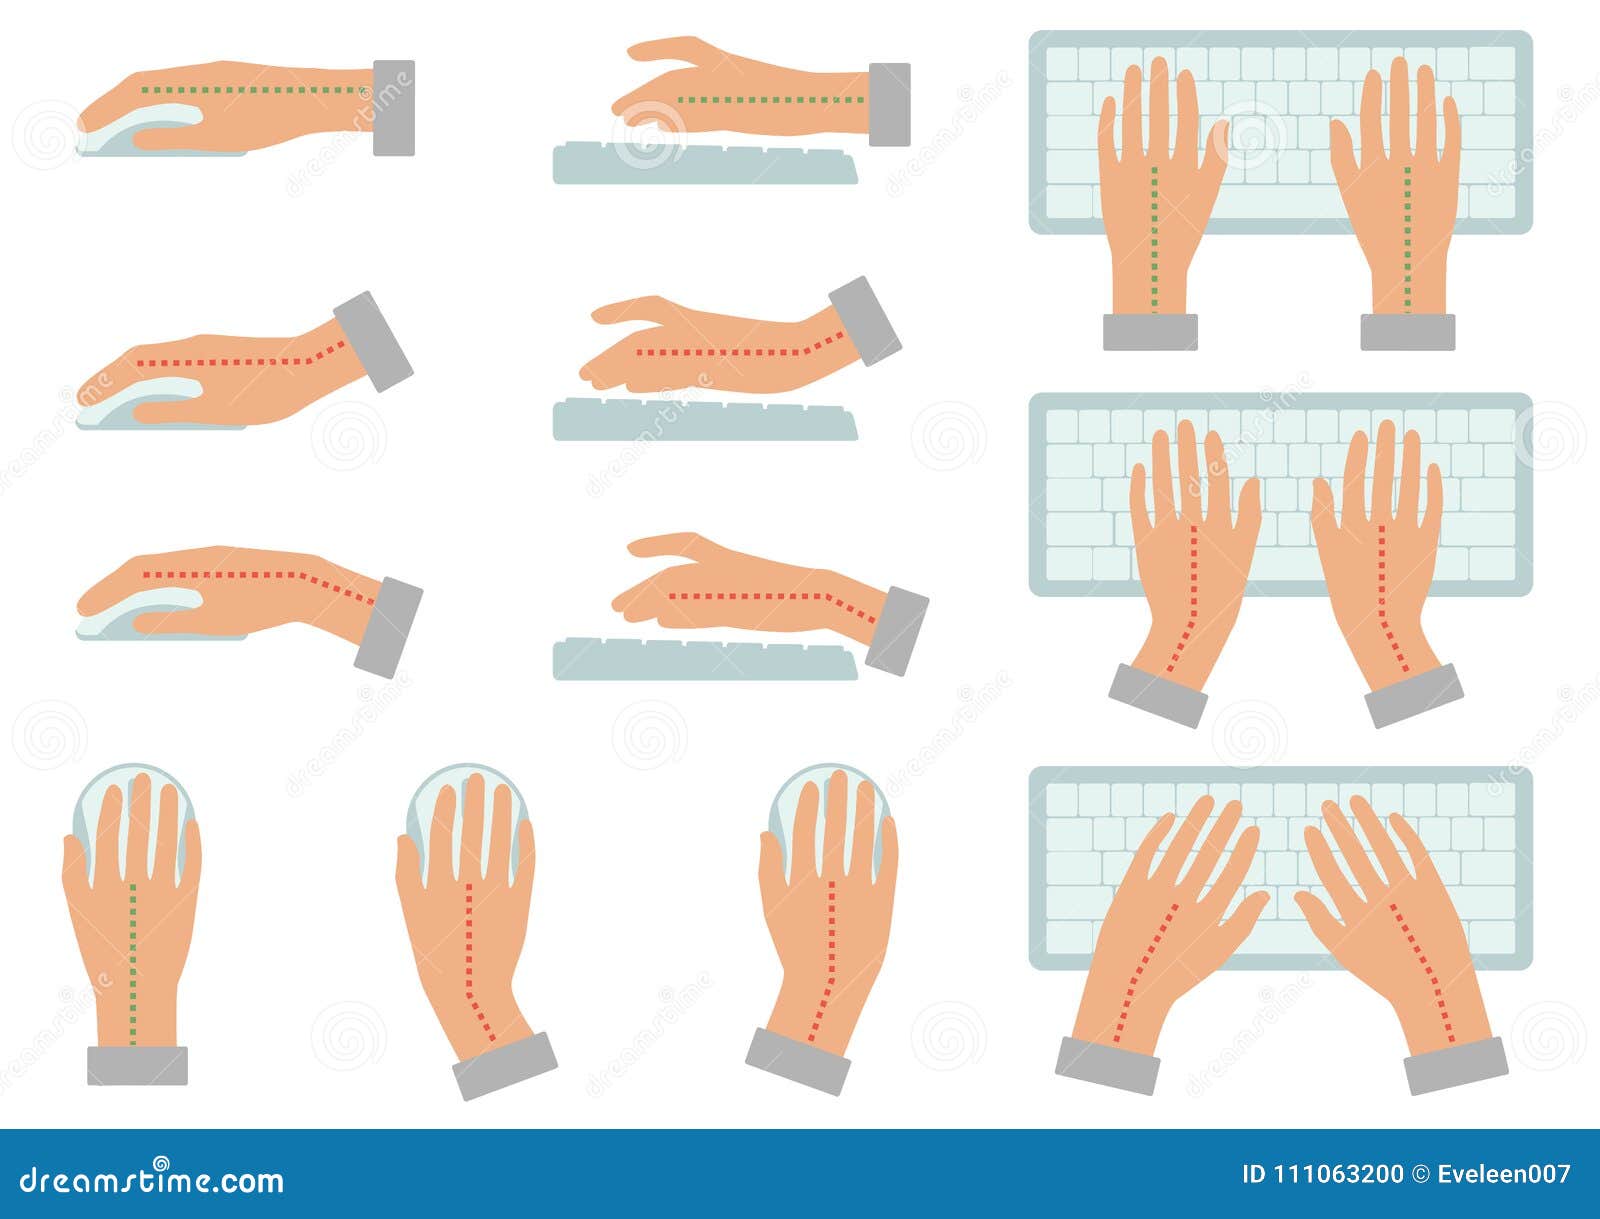 correct and incorrect hand position for use keyboard and holding mouse